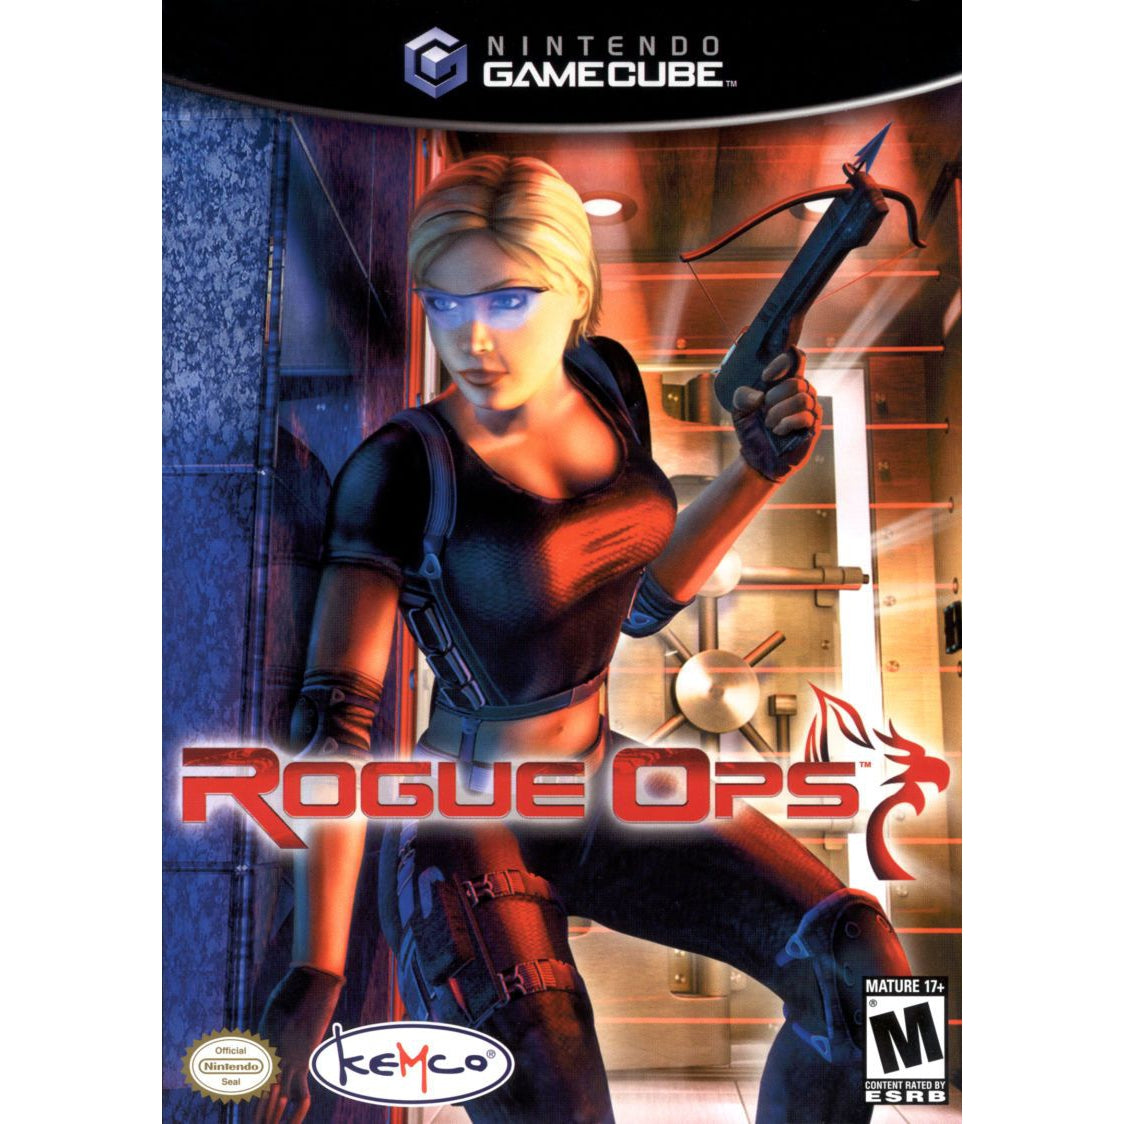 Rogue Ops - GameCube Game Complete - YourGamingShop.com - Buy, Sell, Trade Video Games Online. 120 Day Warranty. Satisfaction Guaranteed.